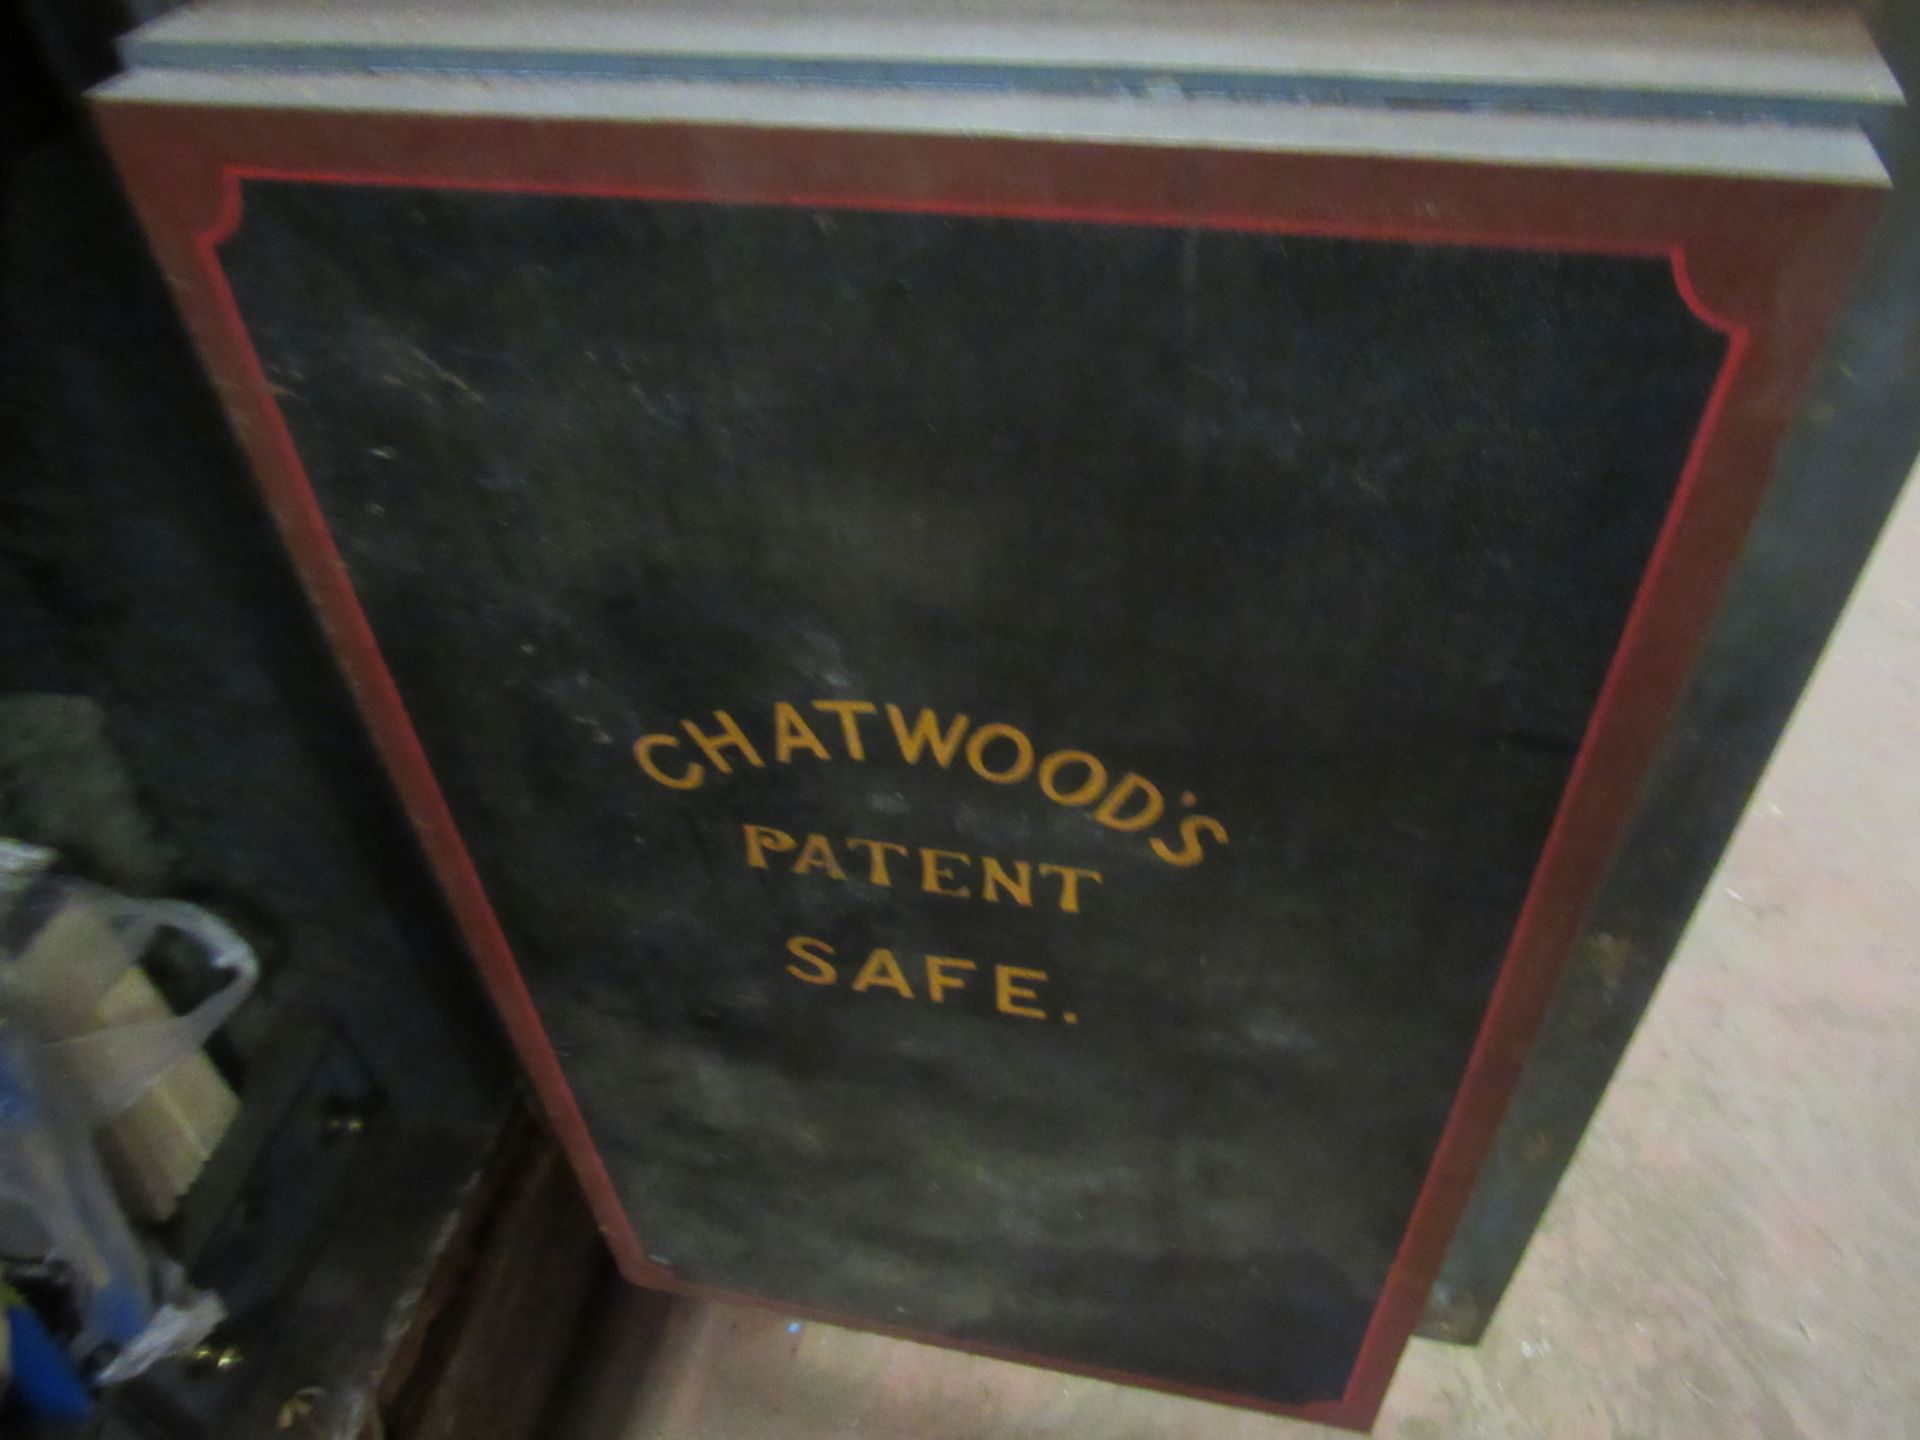 Chatwoods Steel Partners Safe - 26in x 24in x 36in - Image 6 of 6